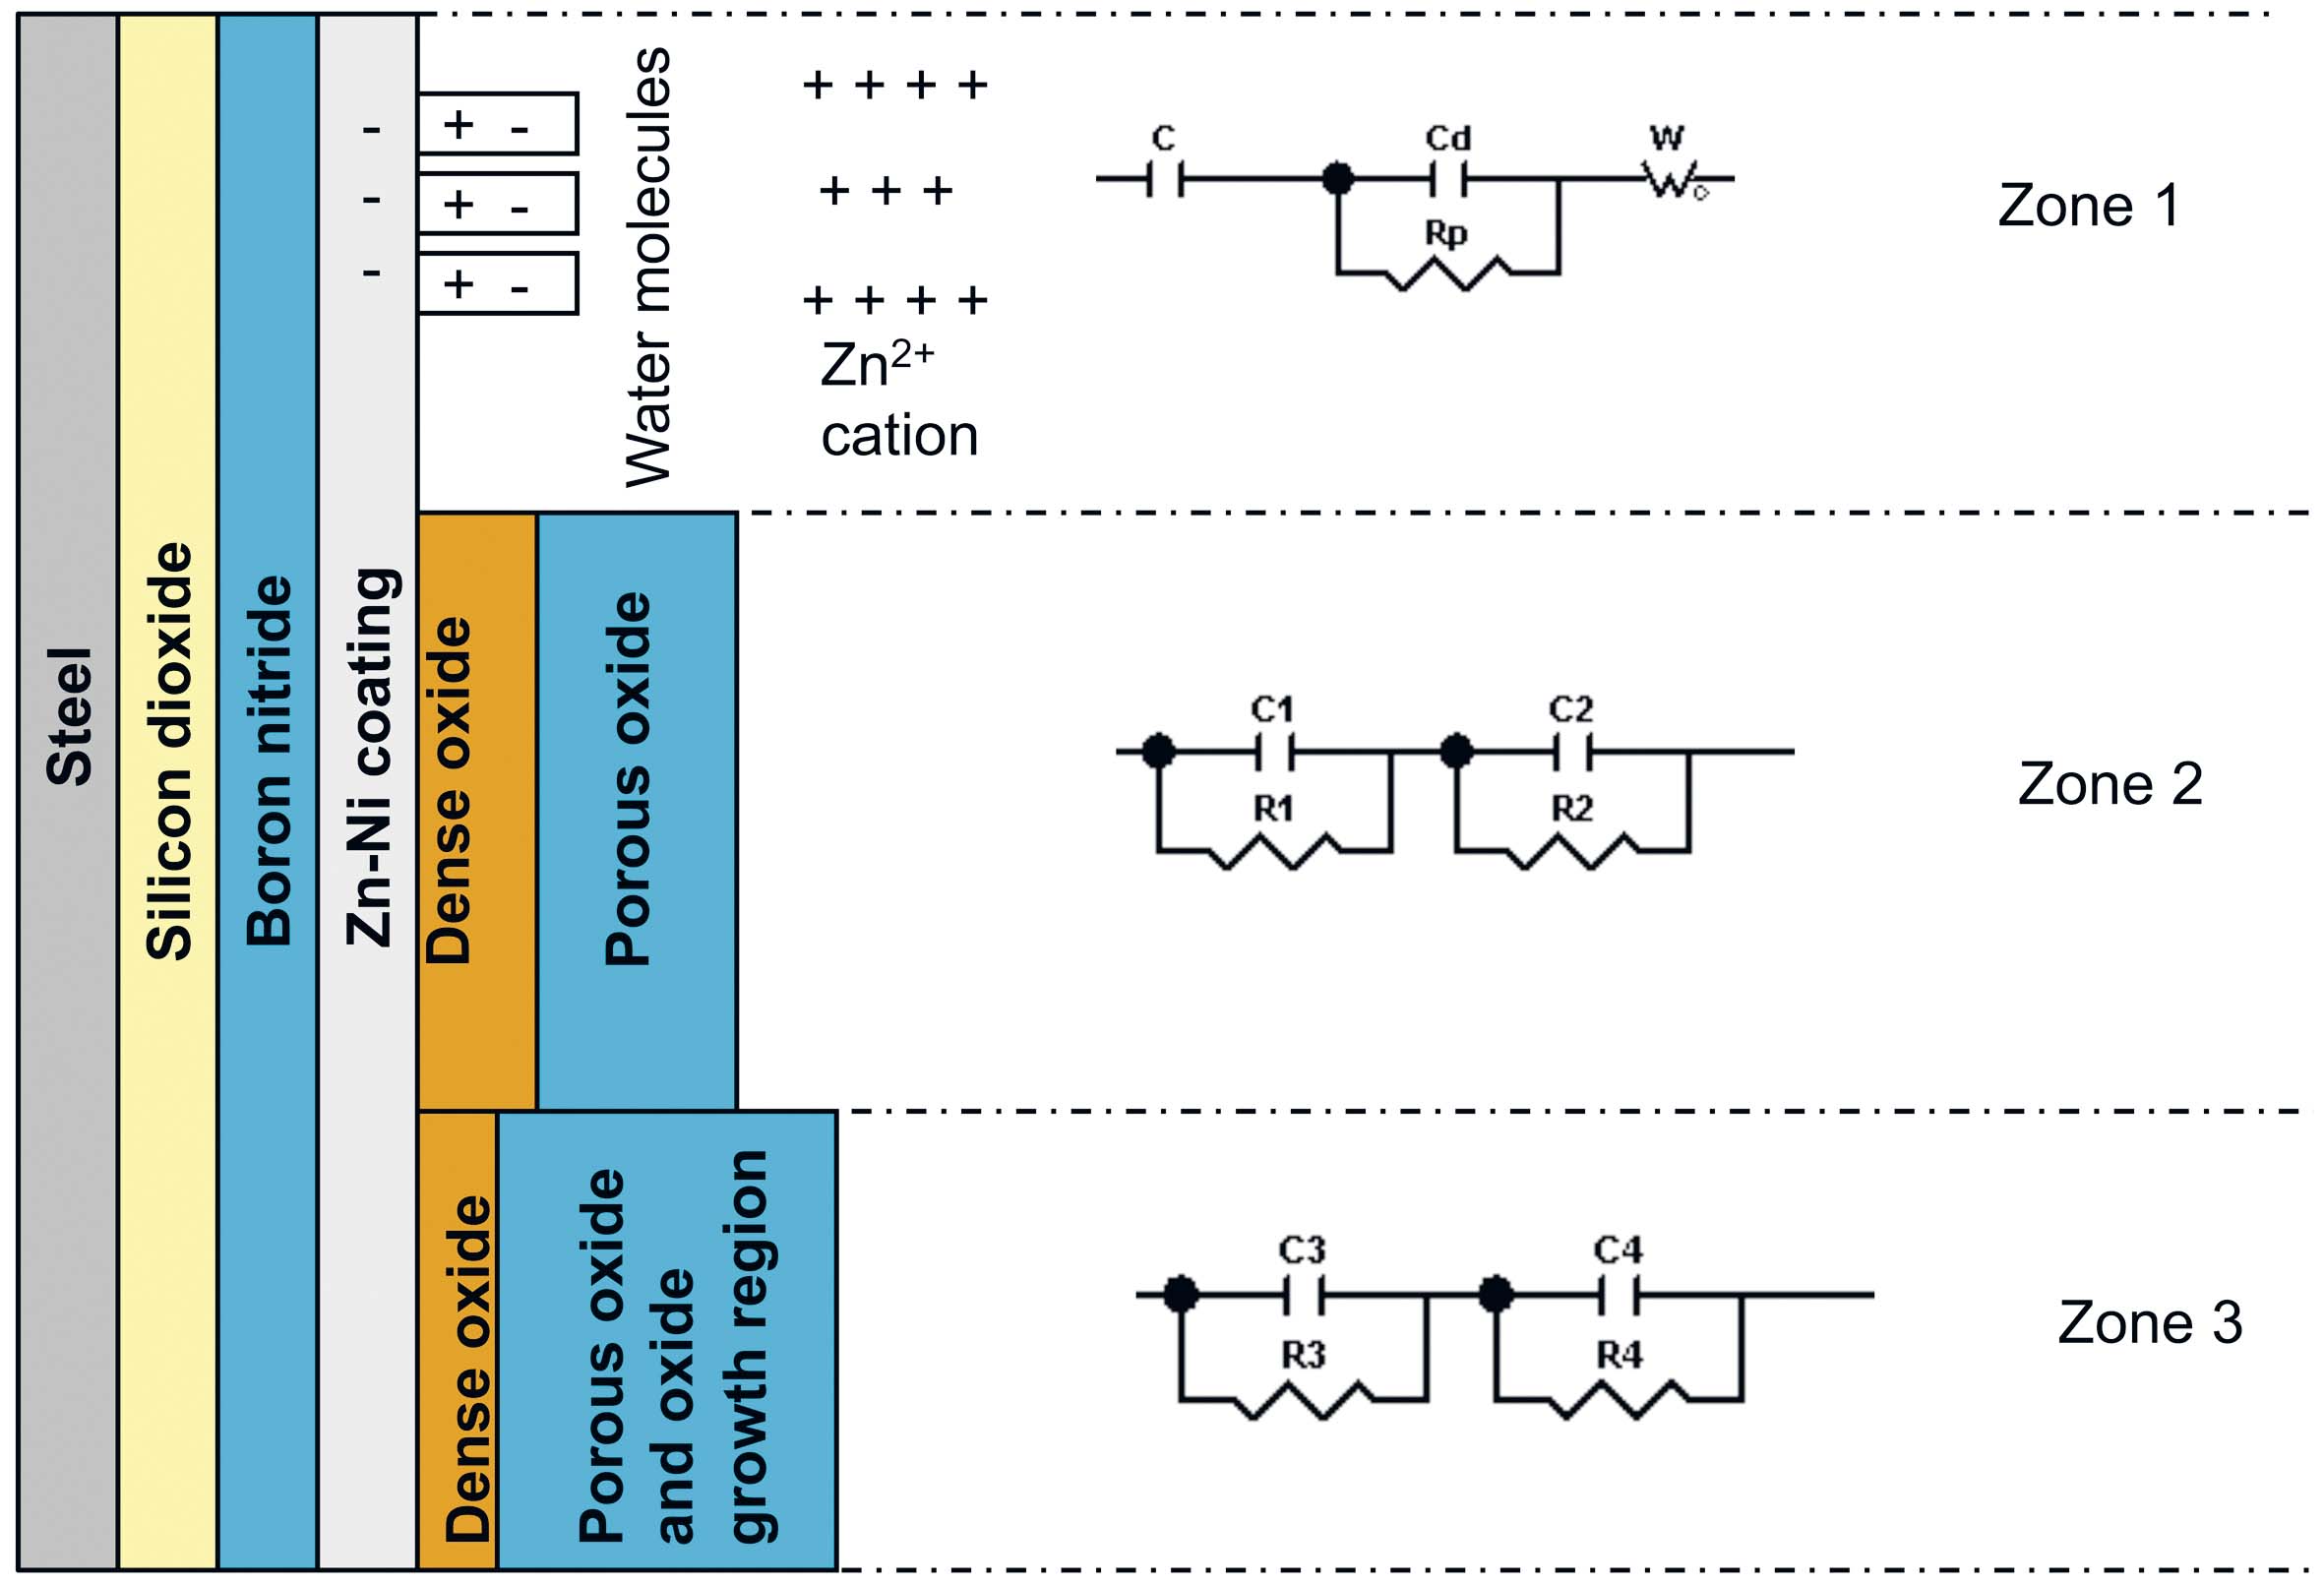 Fig. 18: Schematic representation of the three zones and circuit sides of the T_SiO2+BN+ Zn-Ni+f sample